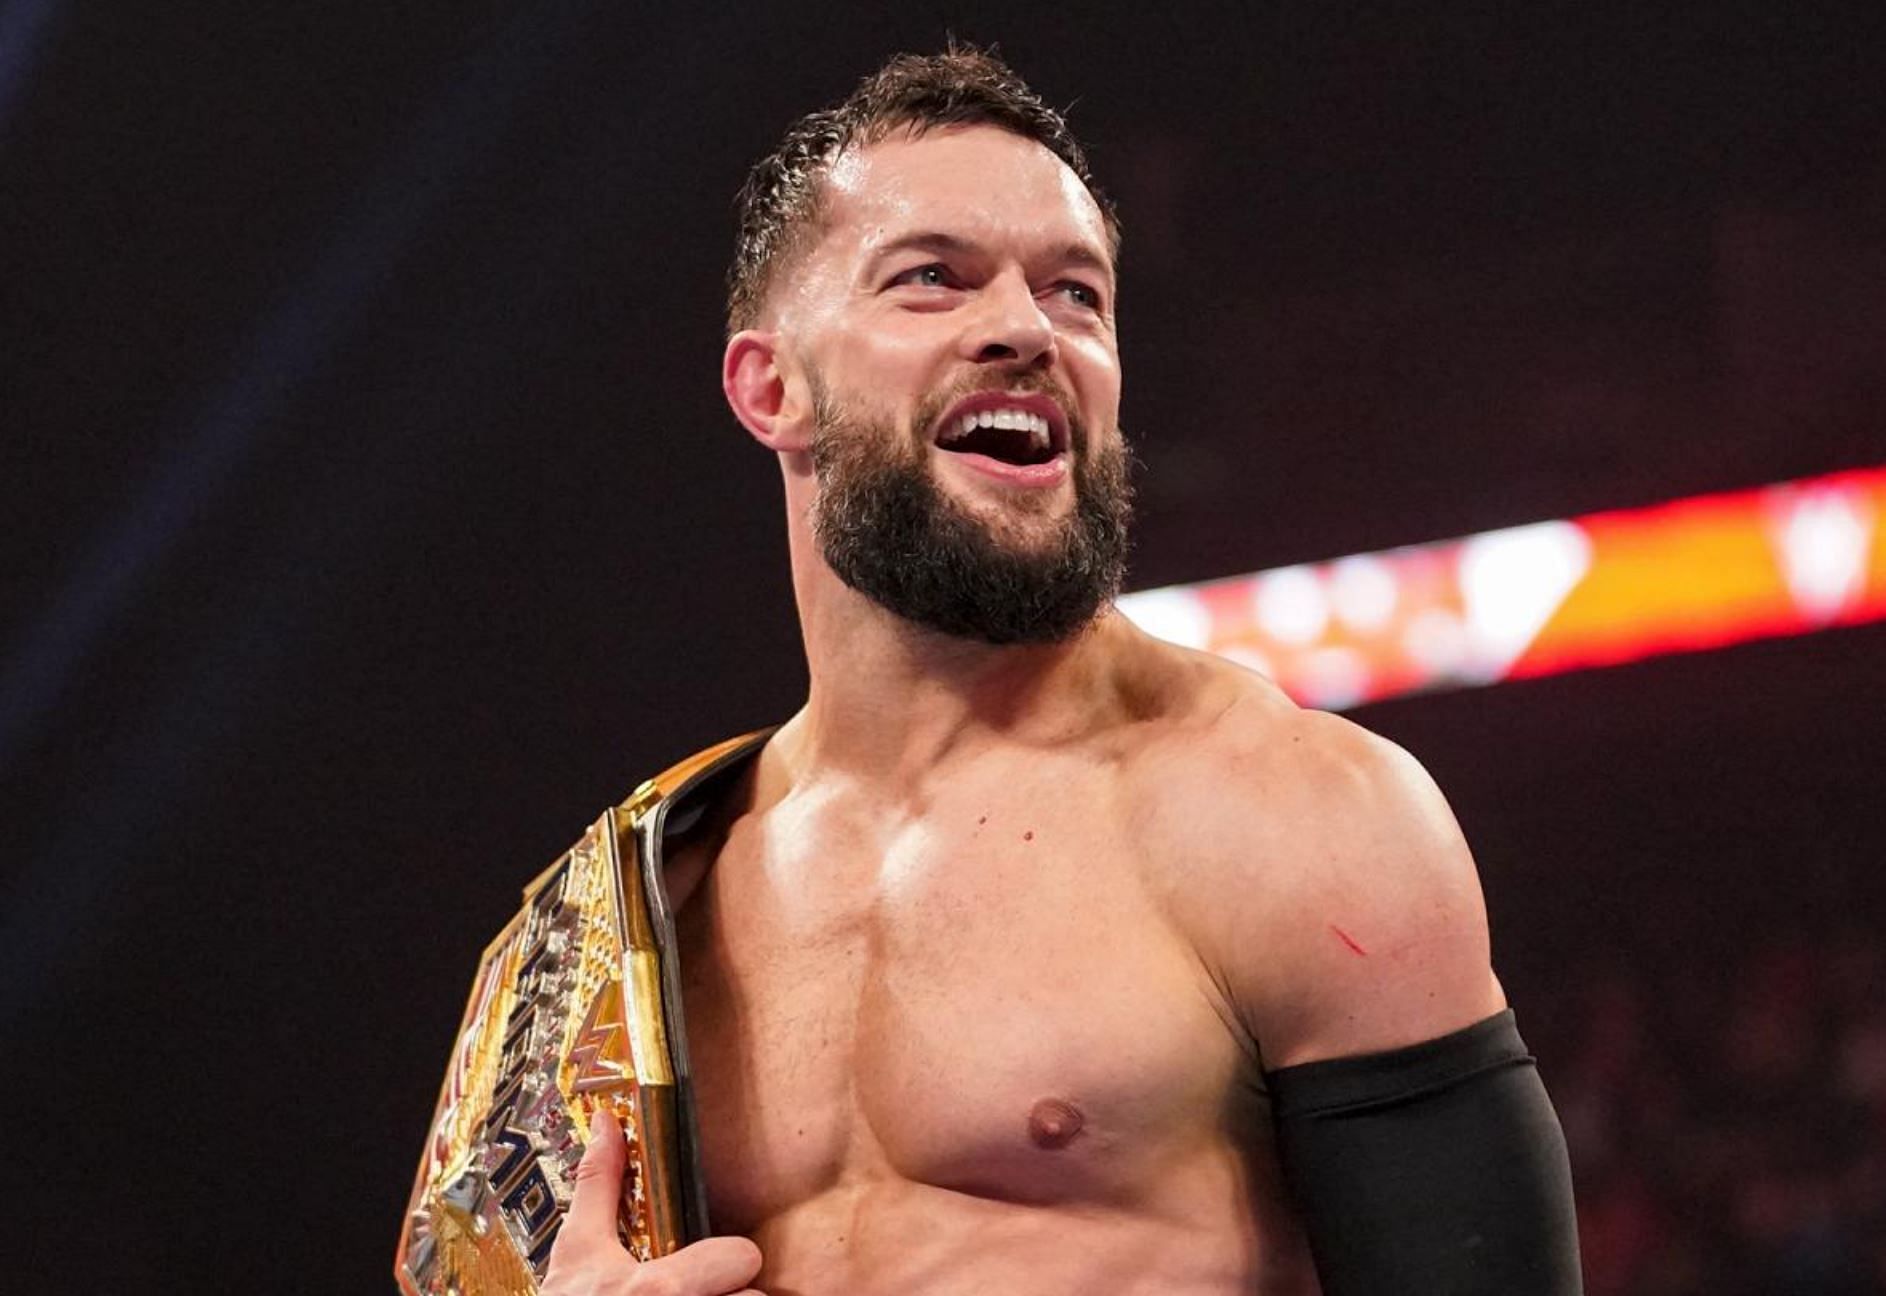 Finn Balor is the new United States Champion